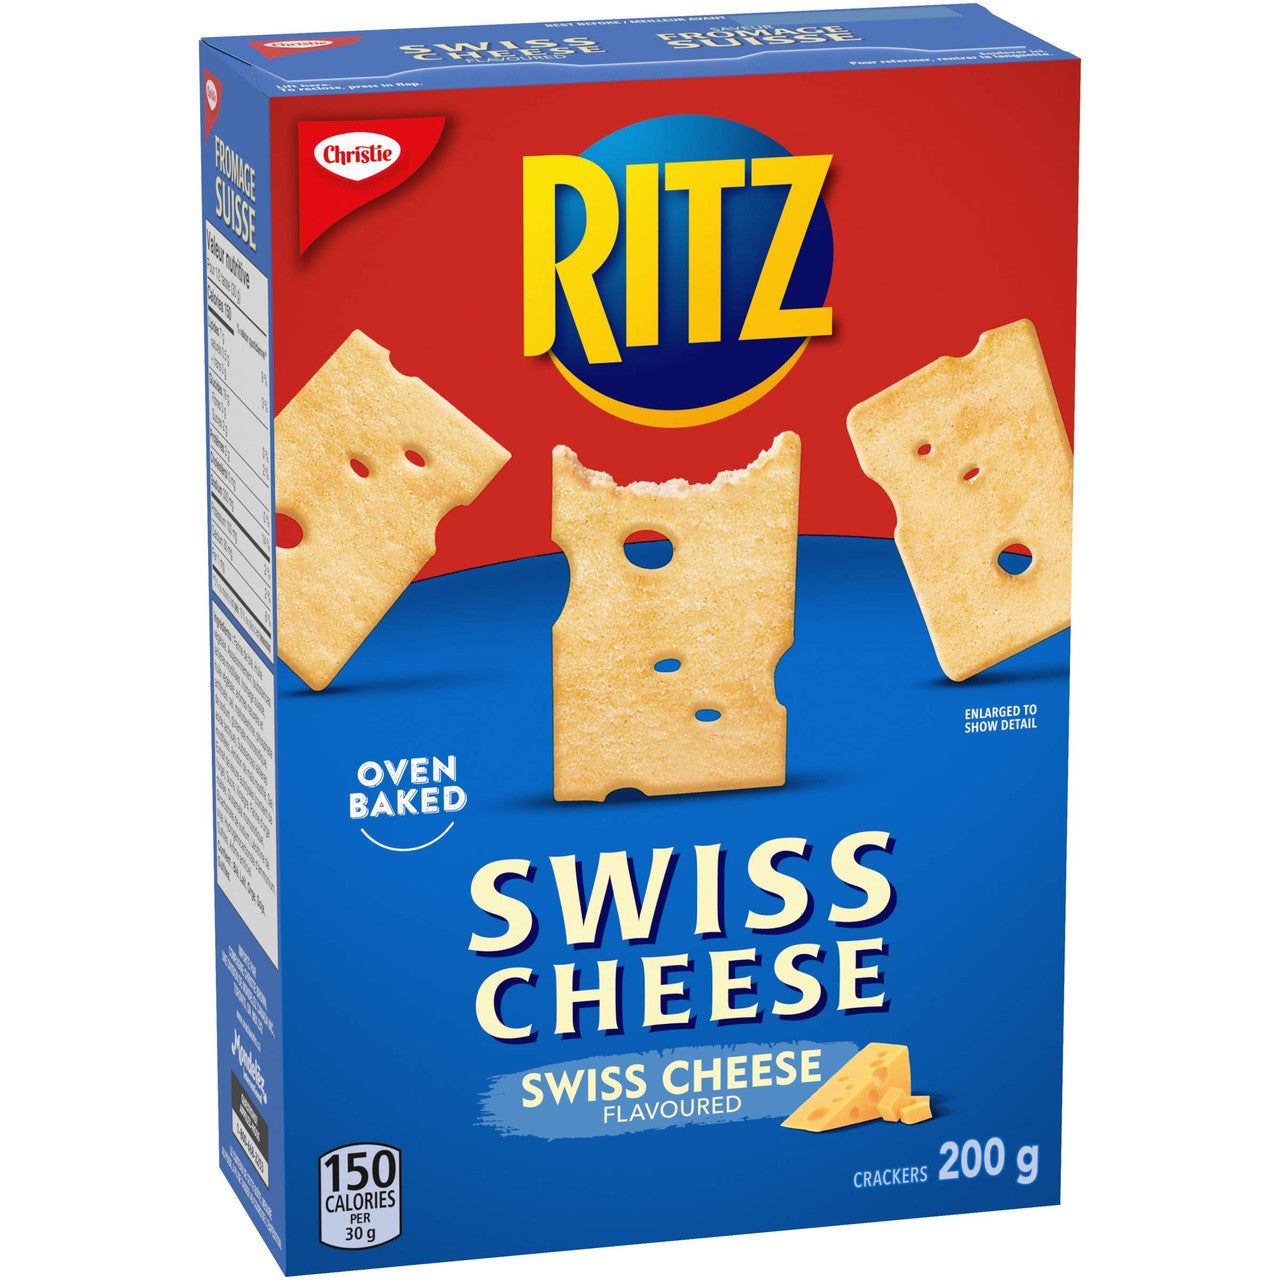 Christie RITZ SWISS CHEESE Flavoured Crackers, 200g/7.1oz., {Imported from Canada}